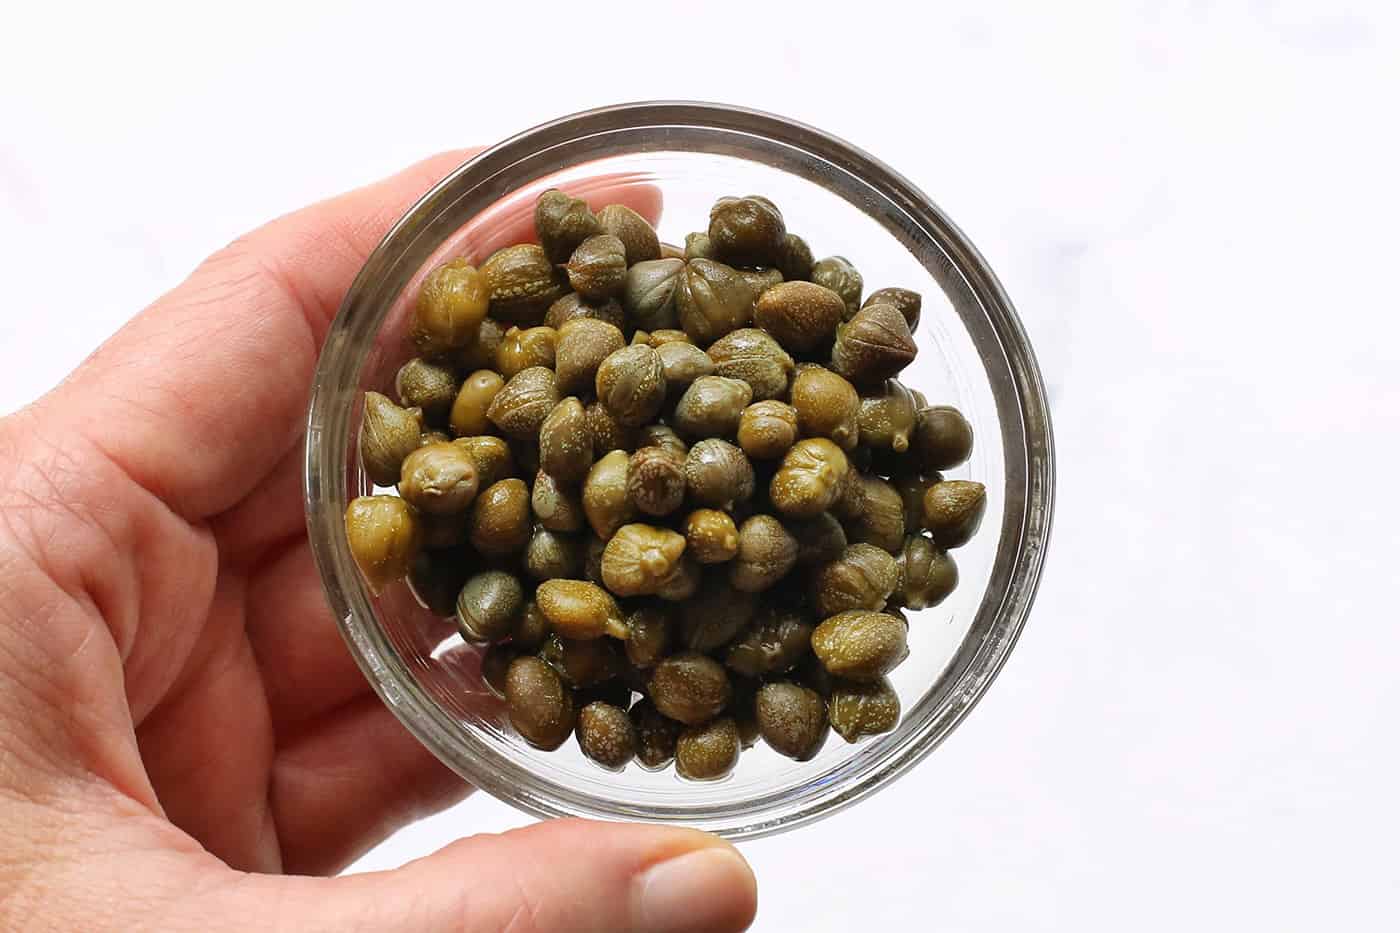 A hand holding a dish of capers.